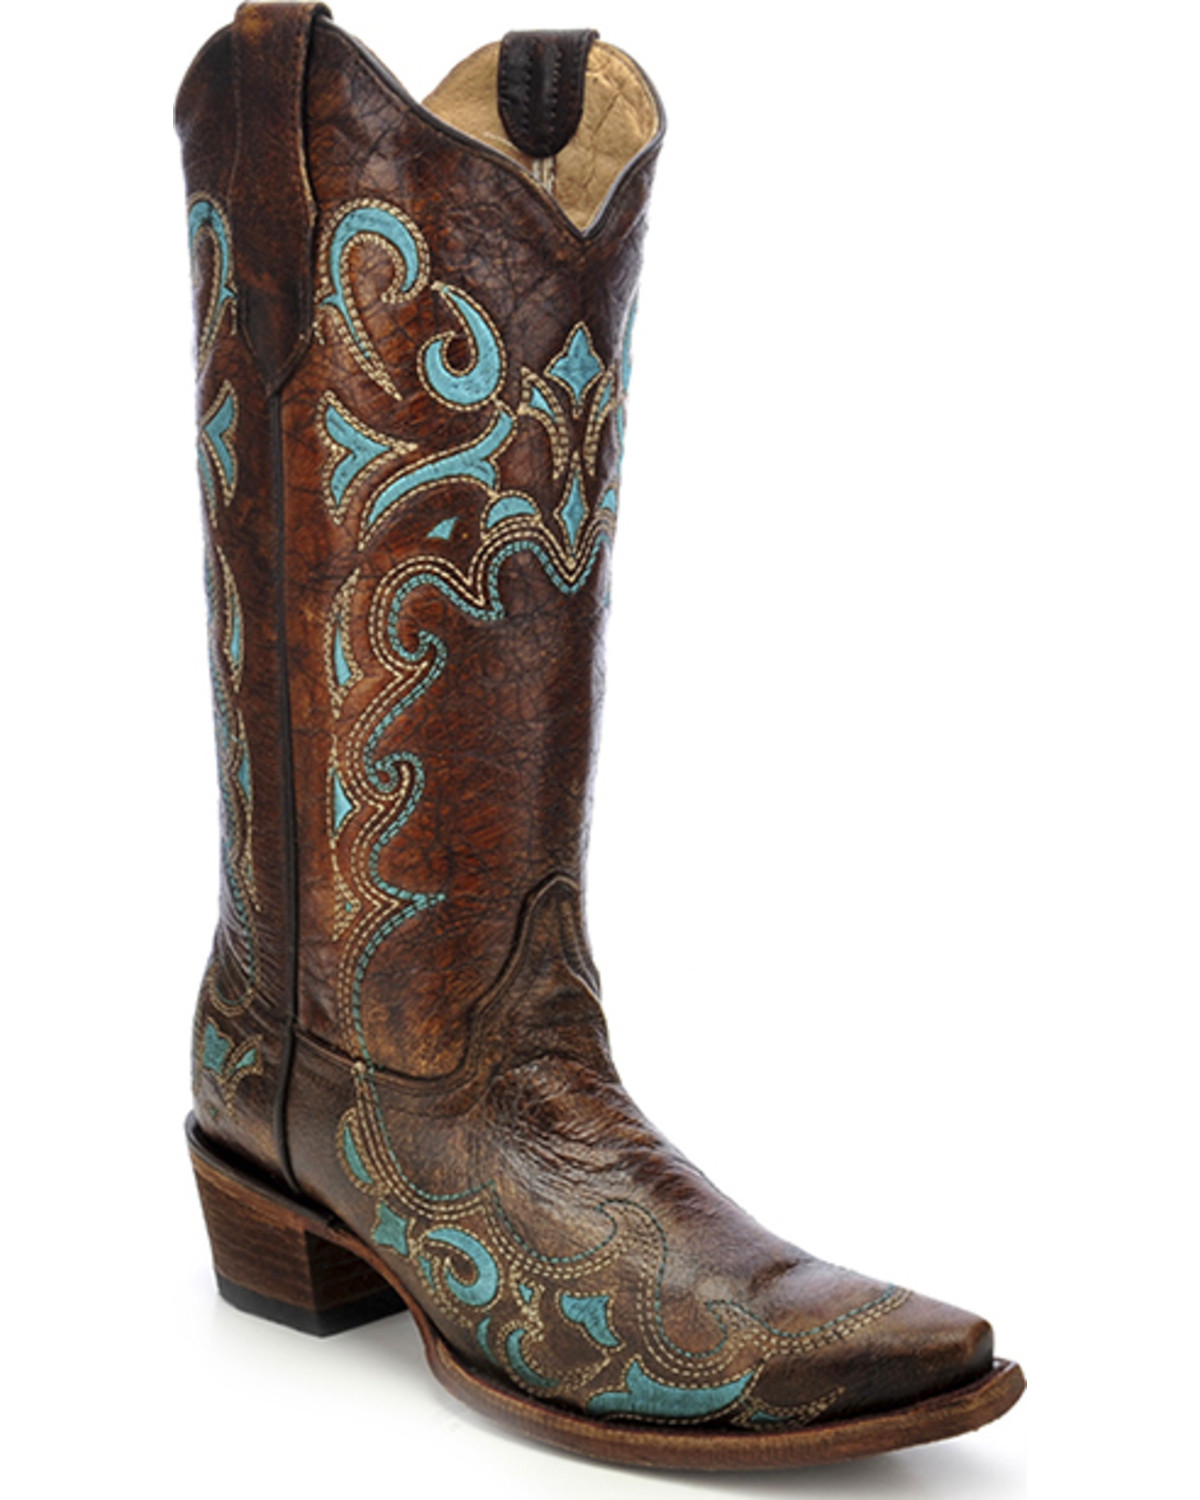 Circle G Embroidered Cowgirl Boots - Snip Toe | Sheplers